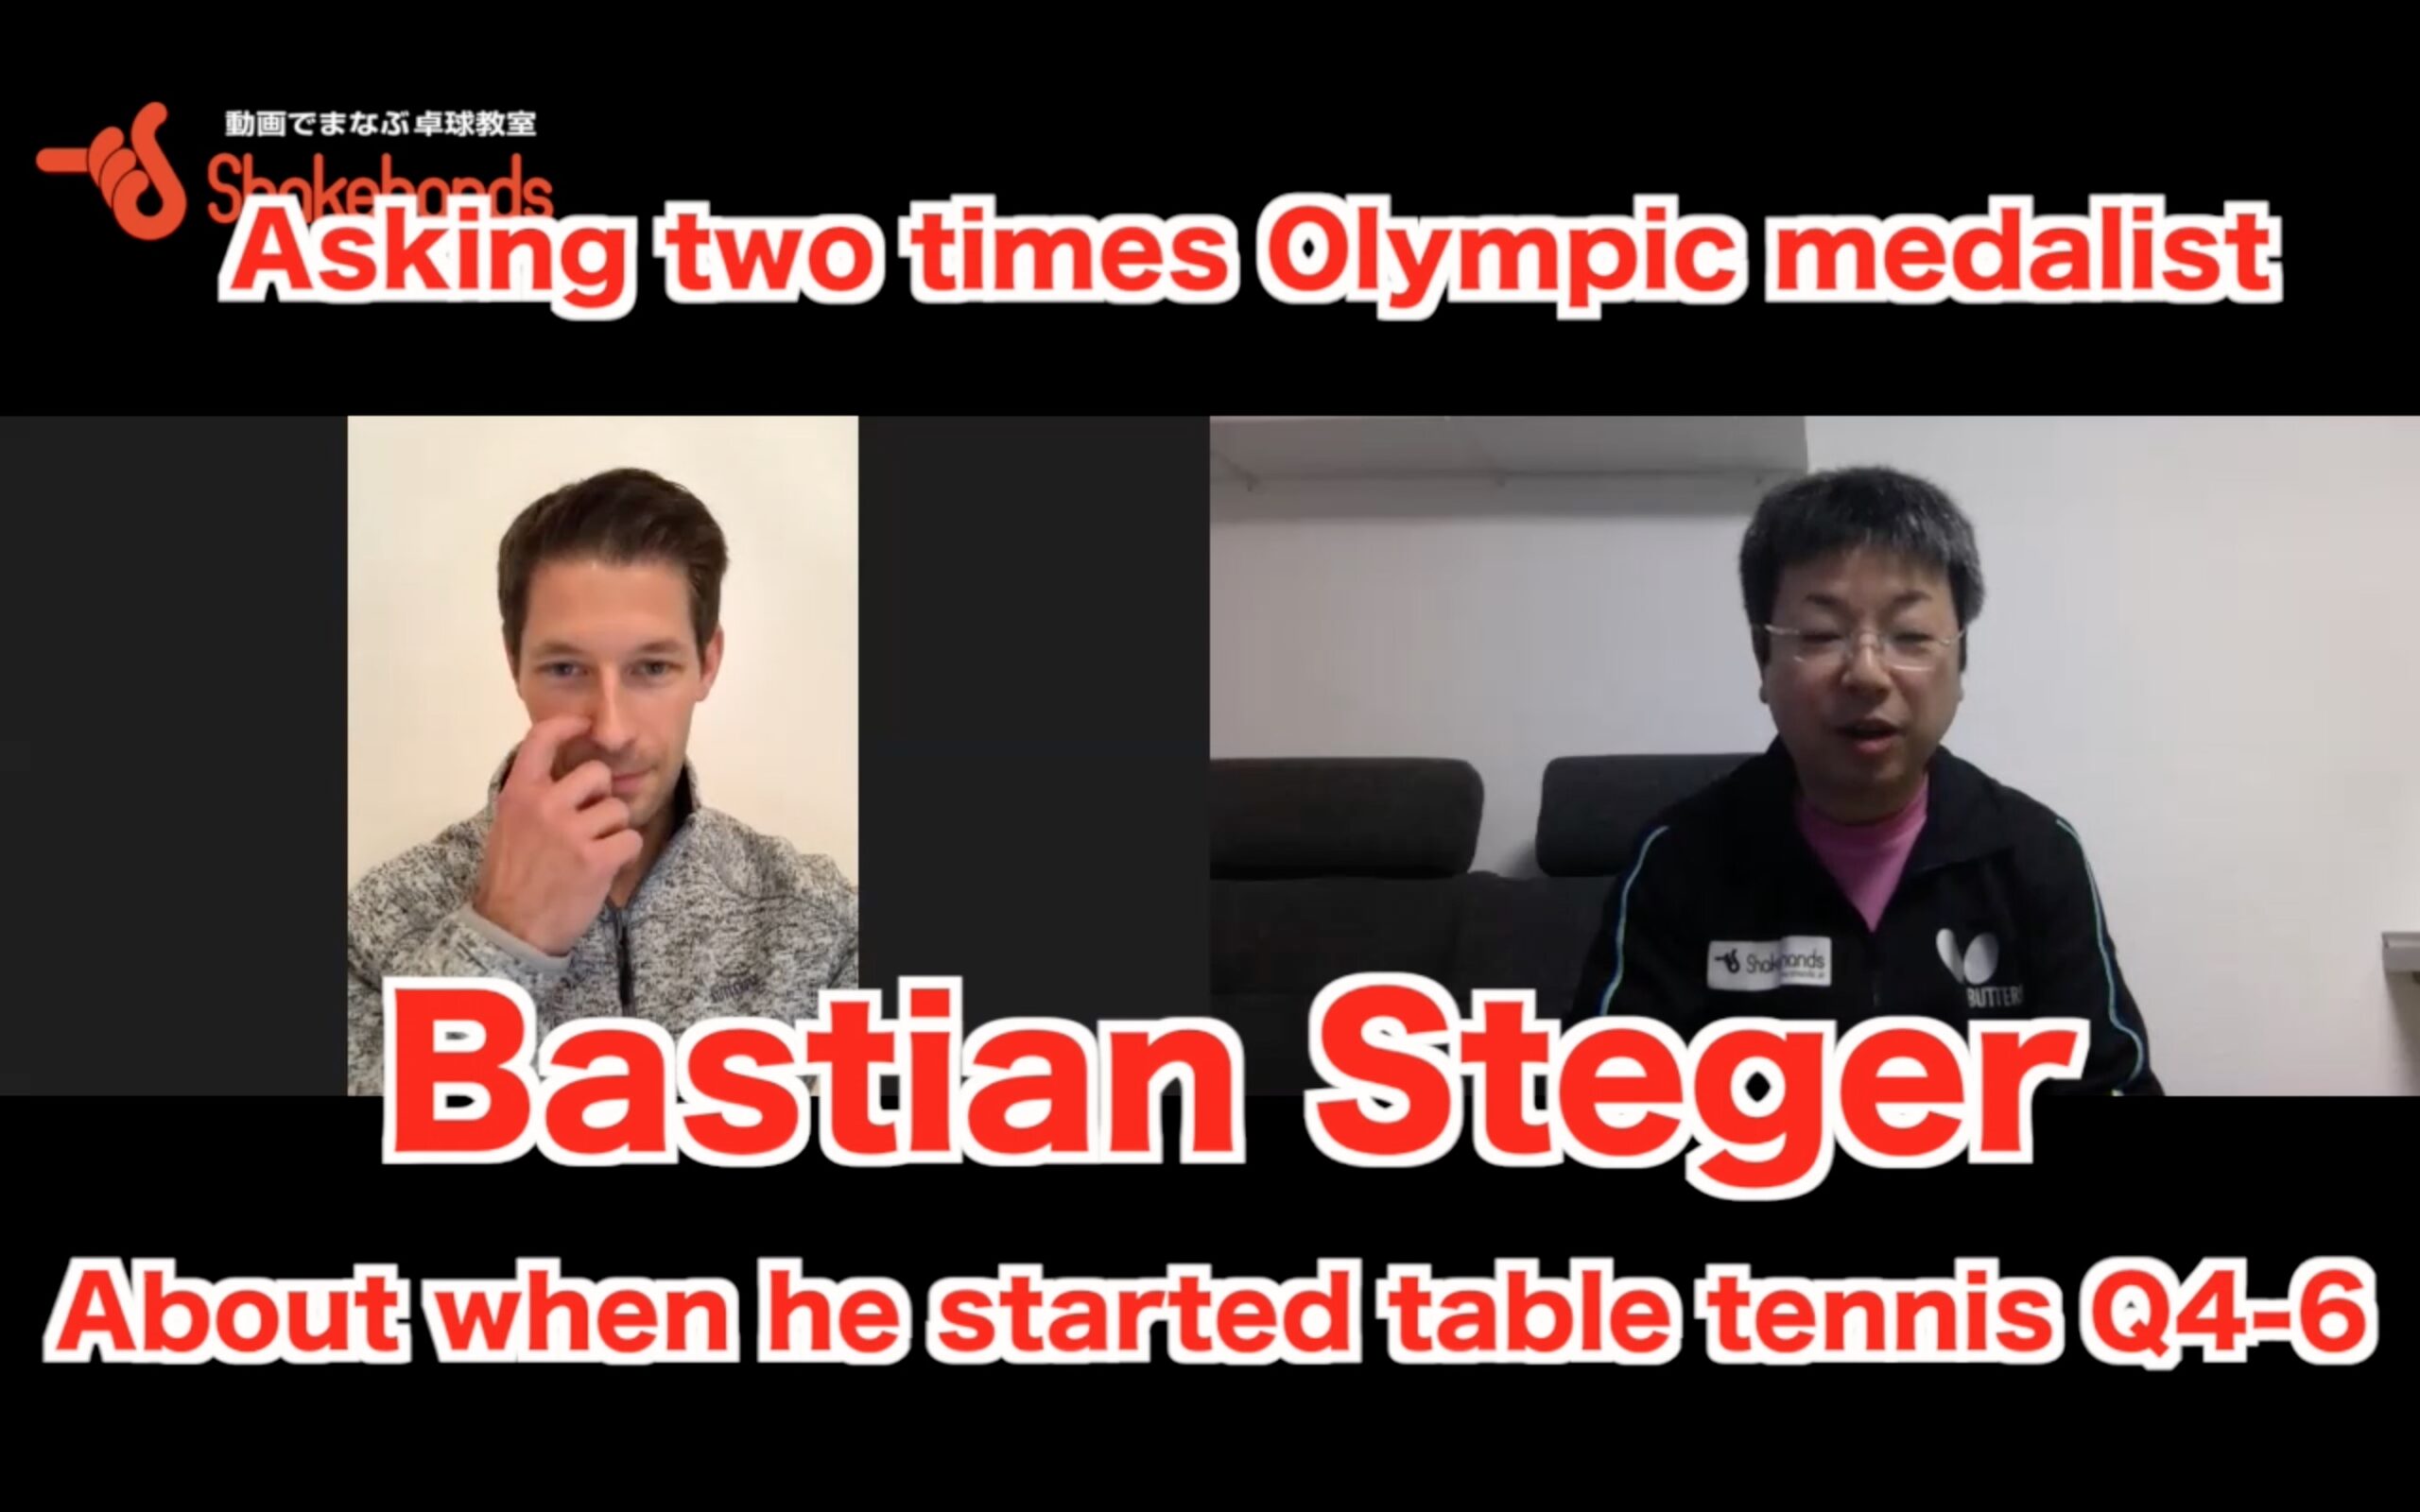 About when started playing table tennis Question 4-6